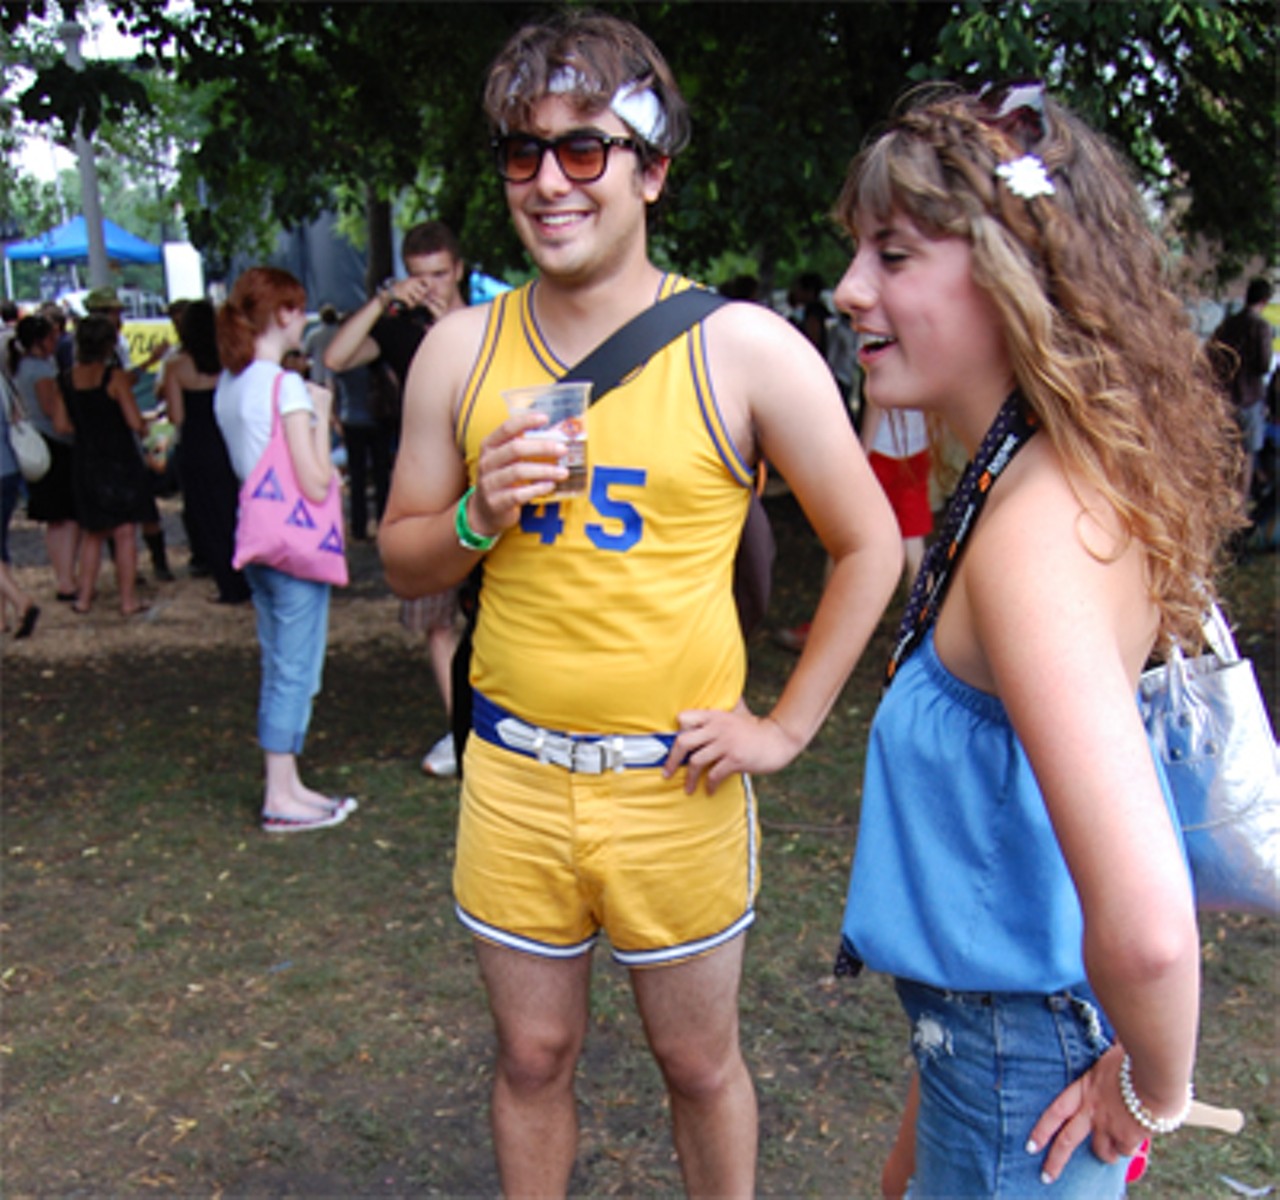 Wearing a basketball jersey is a good way to stay cool at an outdoor fest and a rather stylish way. Wearing short-shorts? Same reasons. But both at the same time makes one look like a bench warmer in a YMCA under-30 league.
Click here for set reviews and  more photos from Pitchfork '08.